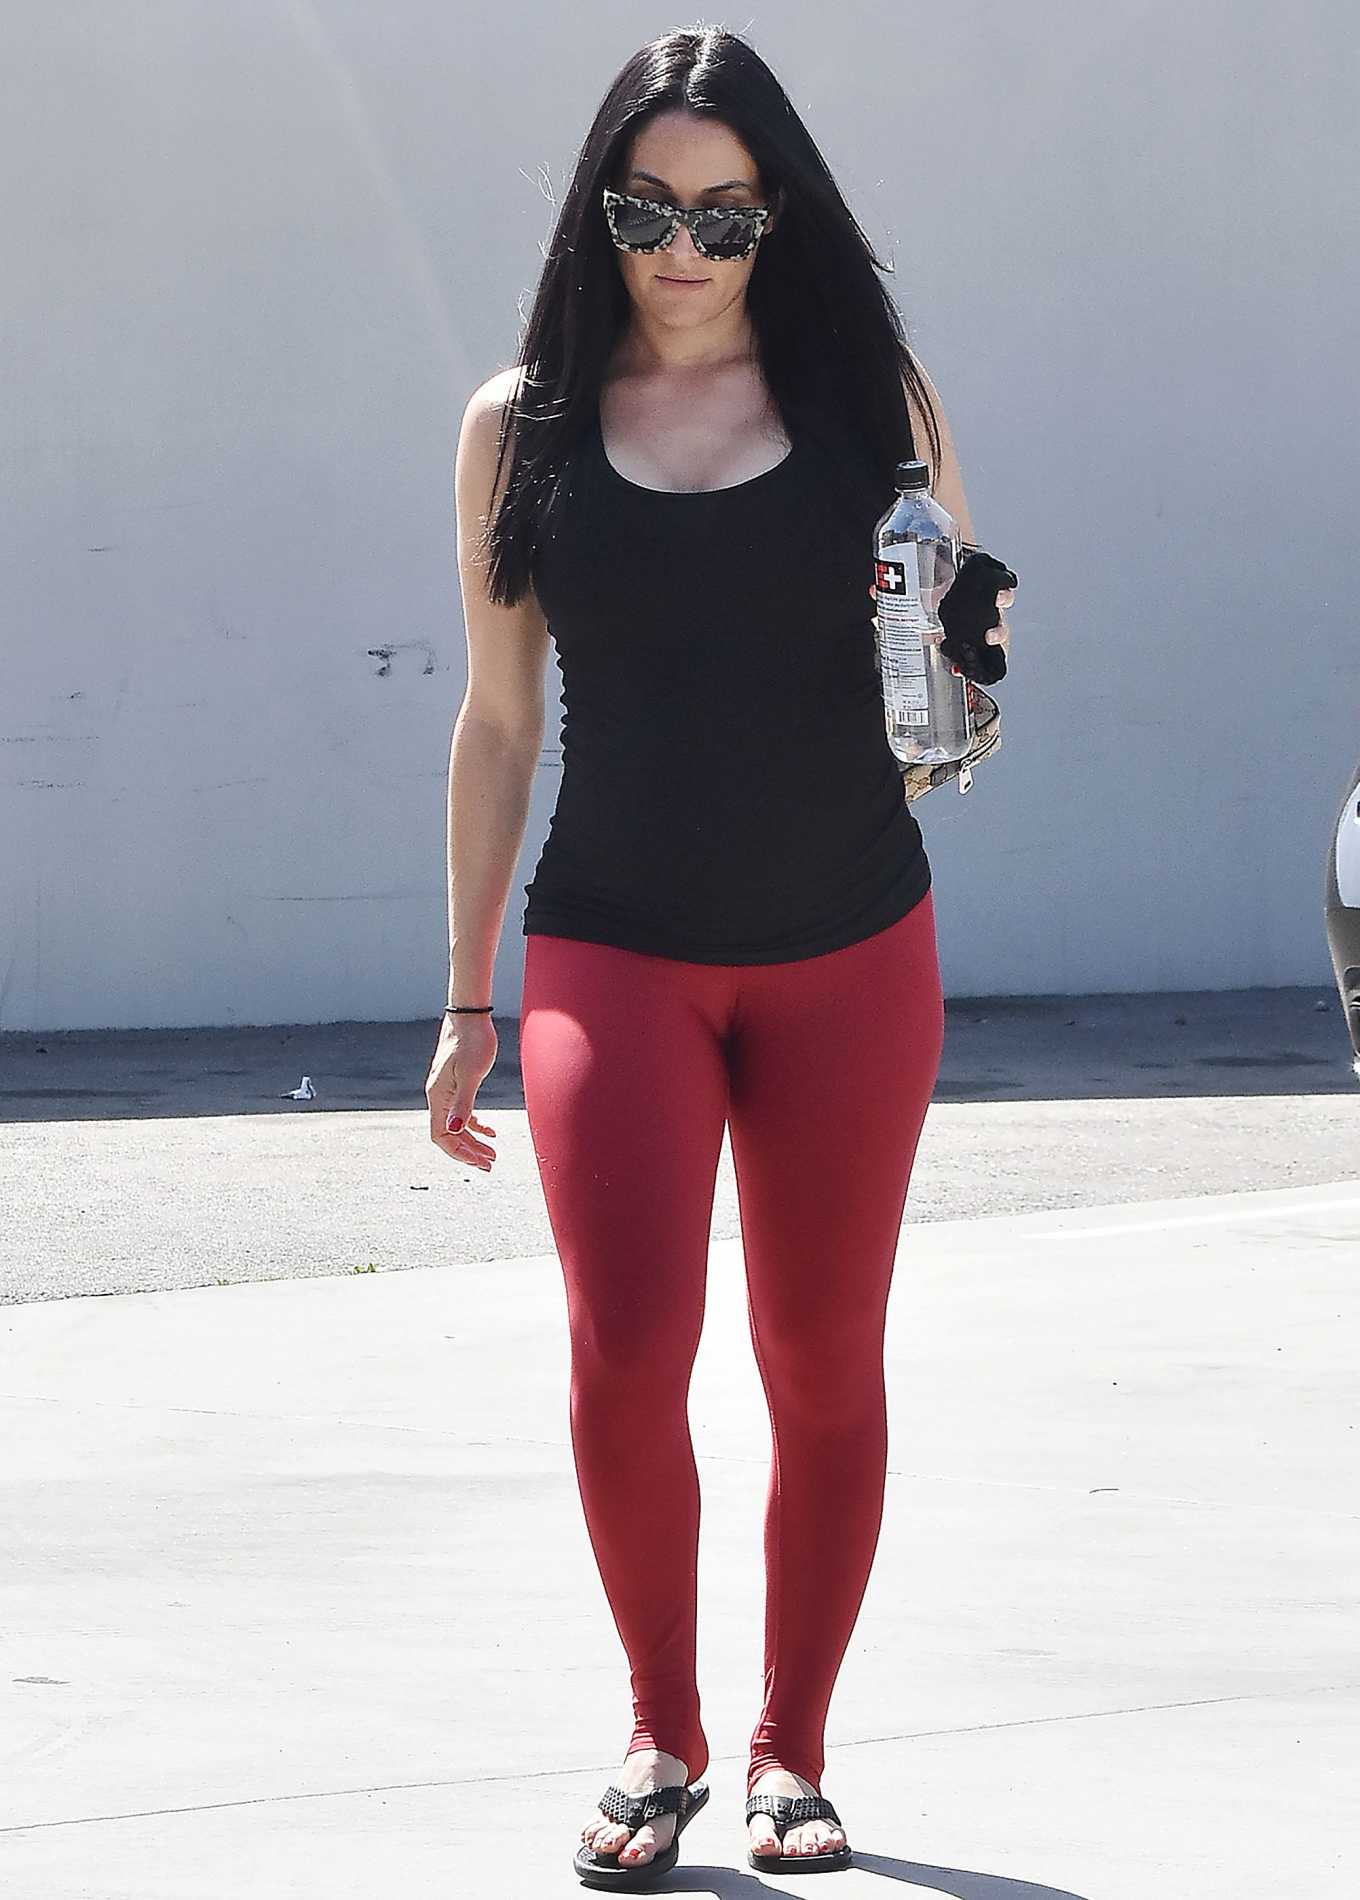 Nikki Bella in red Tights â€“ Out and about in Los Angeles